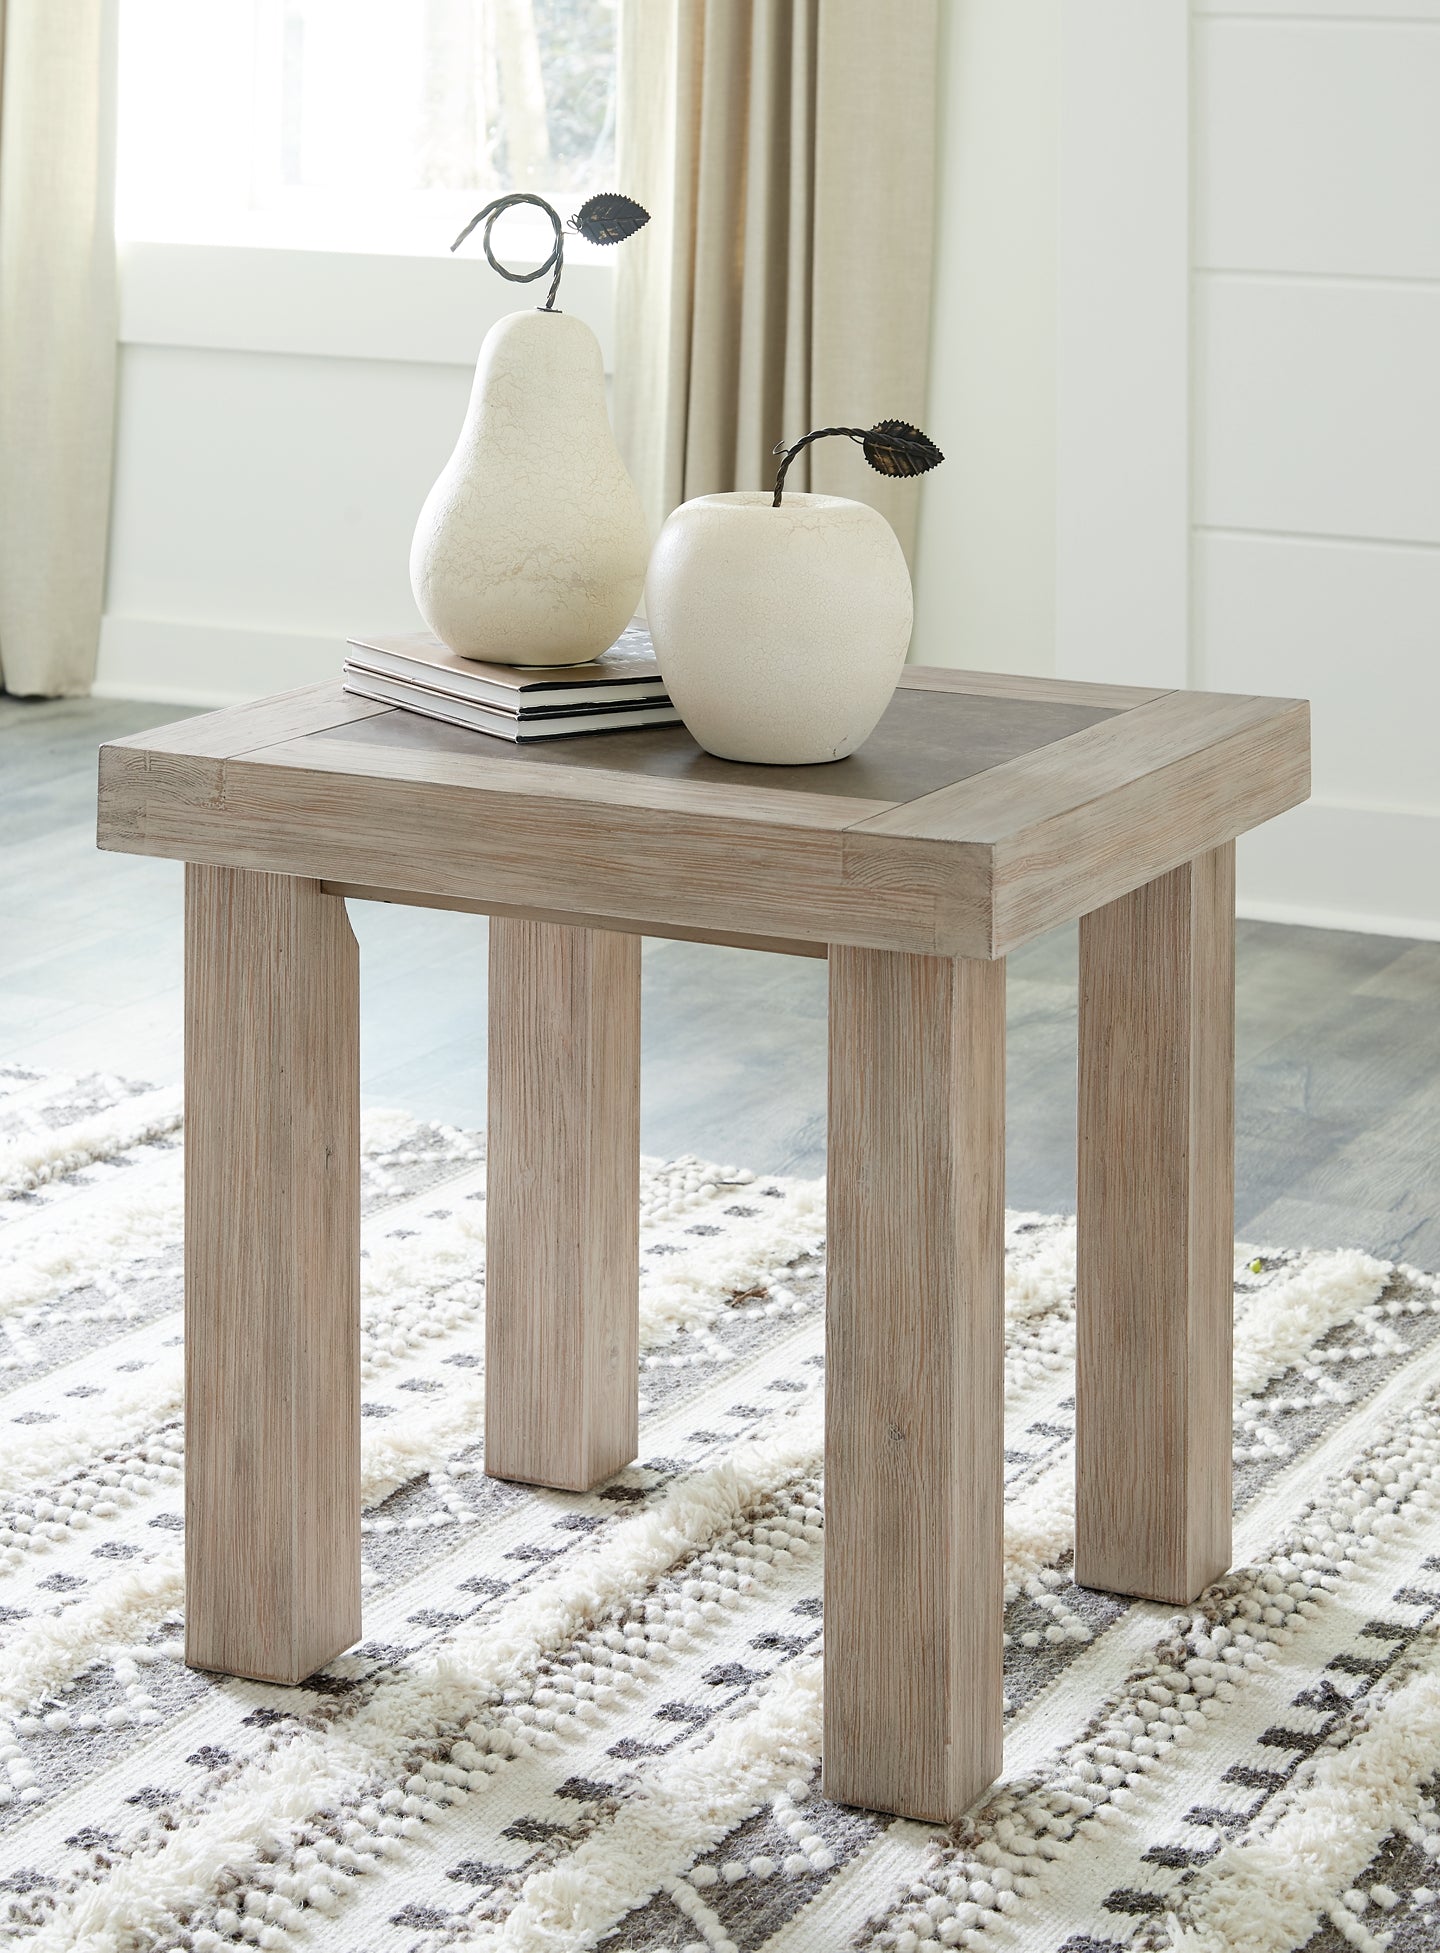 Ashley Express - Hennington Coffee Table with 1 End Table